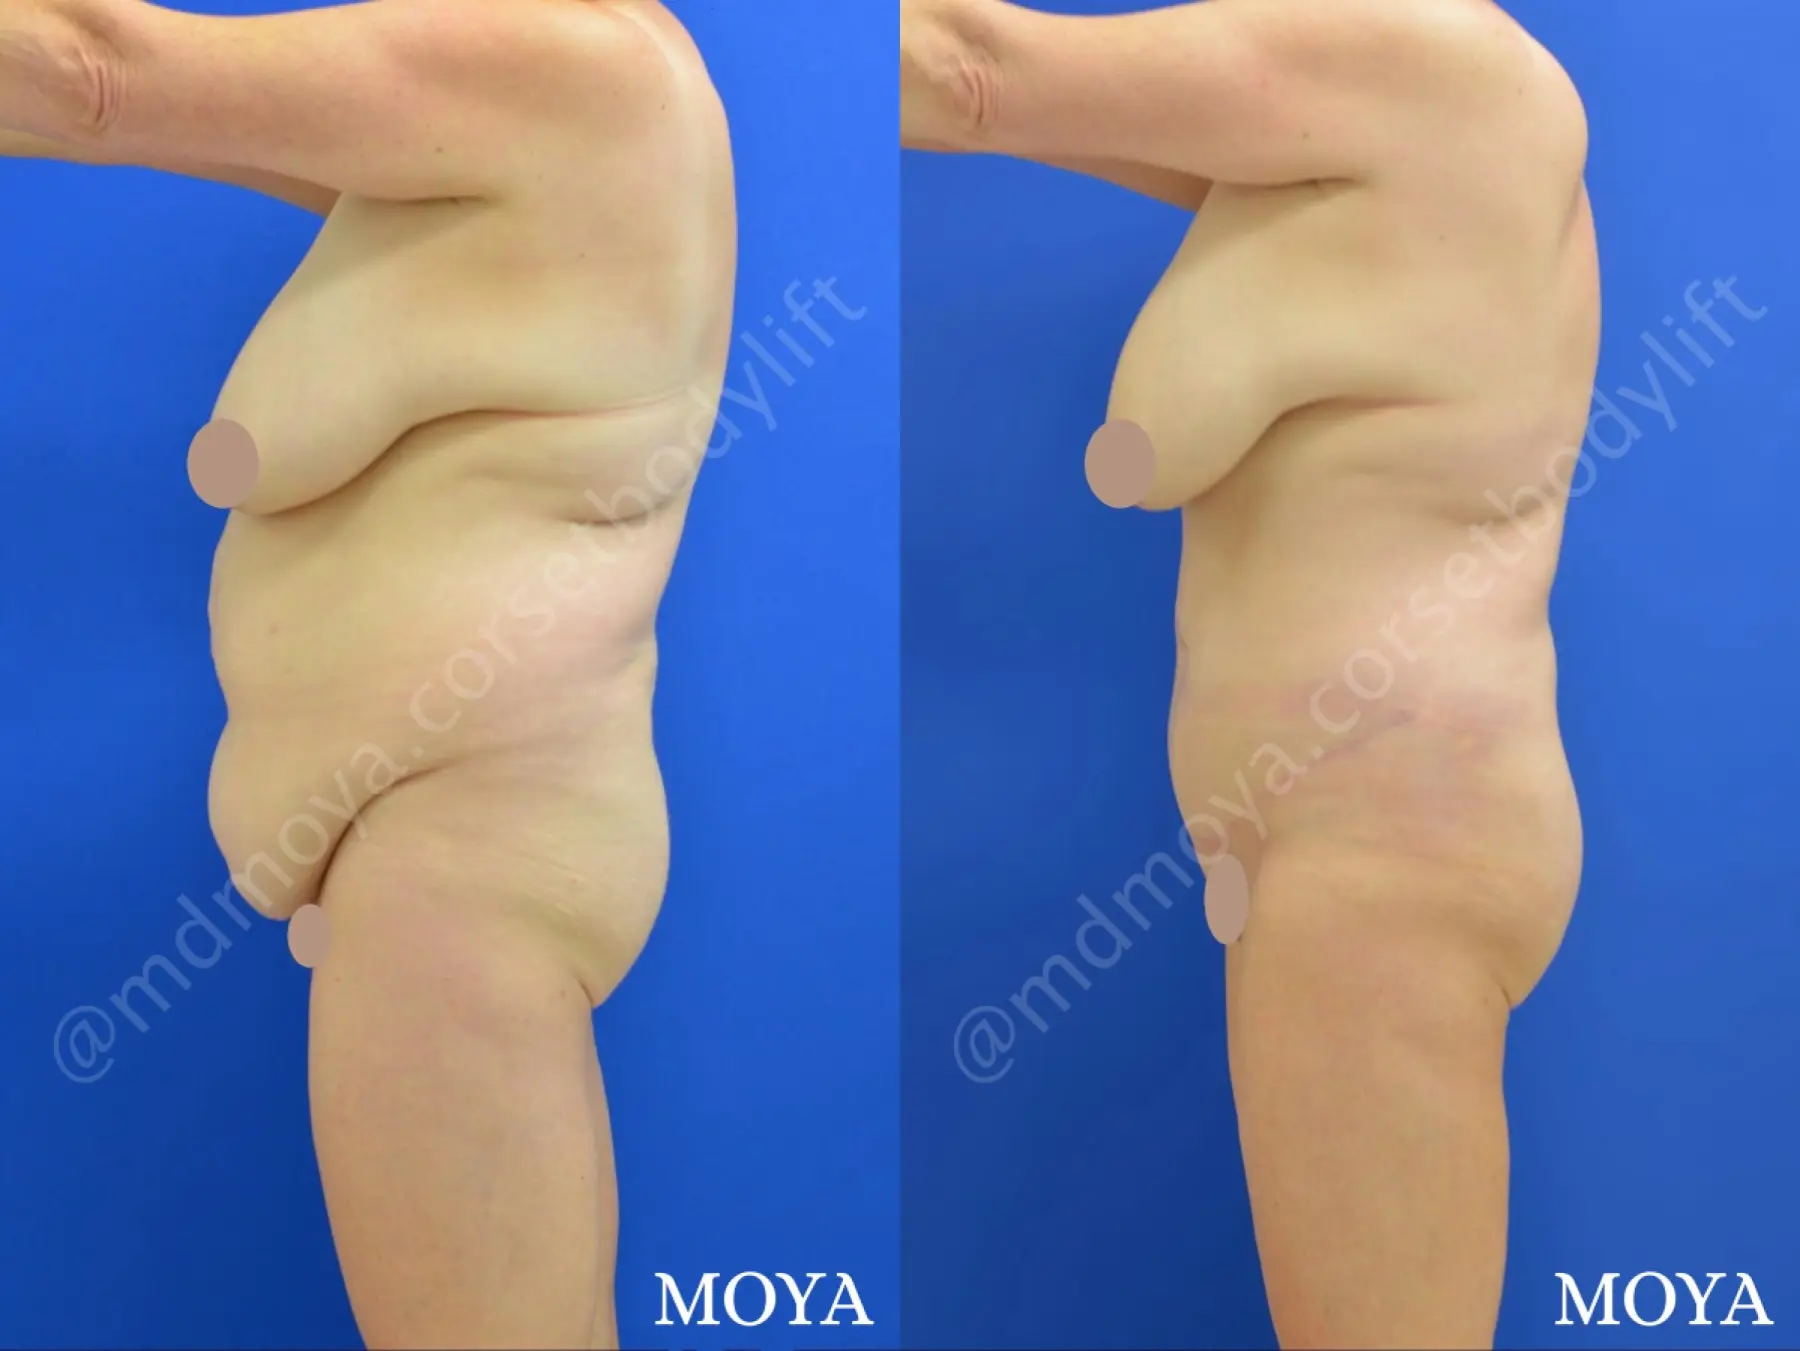 Fleur-de-lis Tummy Tuck (std):  BMI 28 - Before and After 2